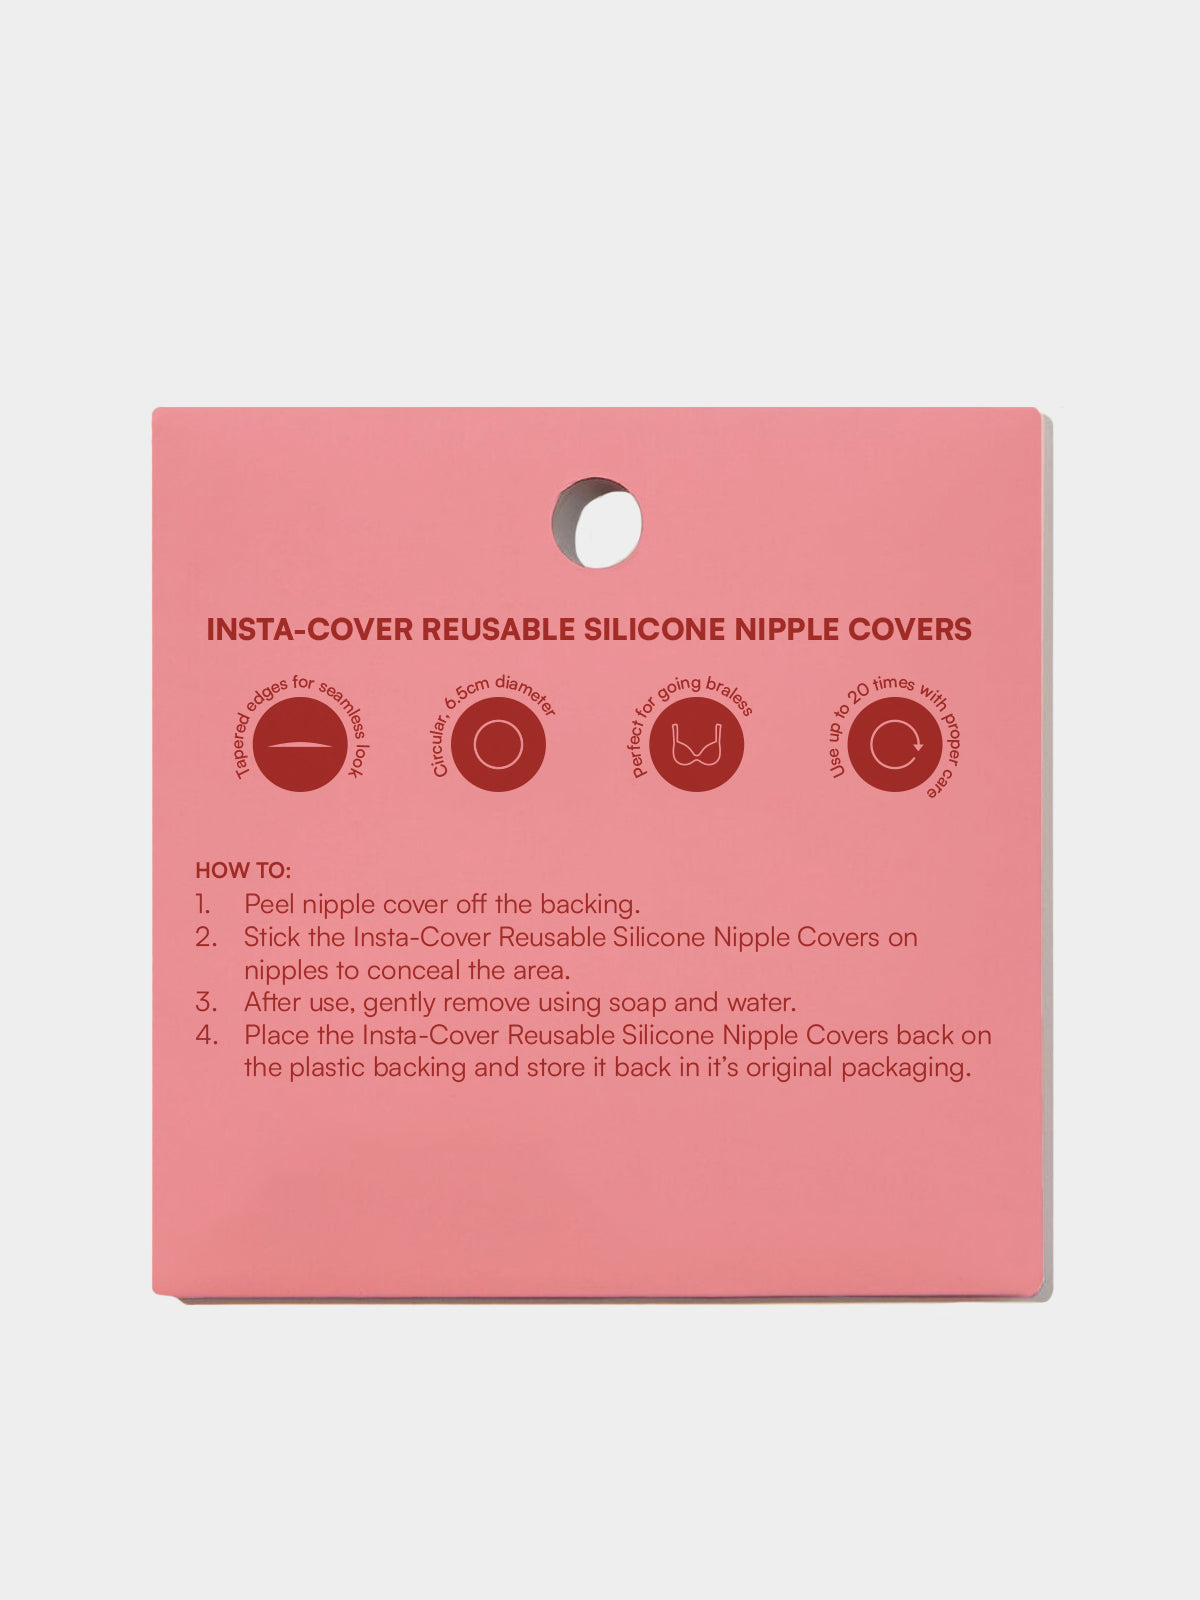 Insta-Cover Reusable Silicone Nipple Covers in Nude